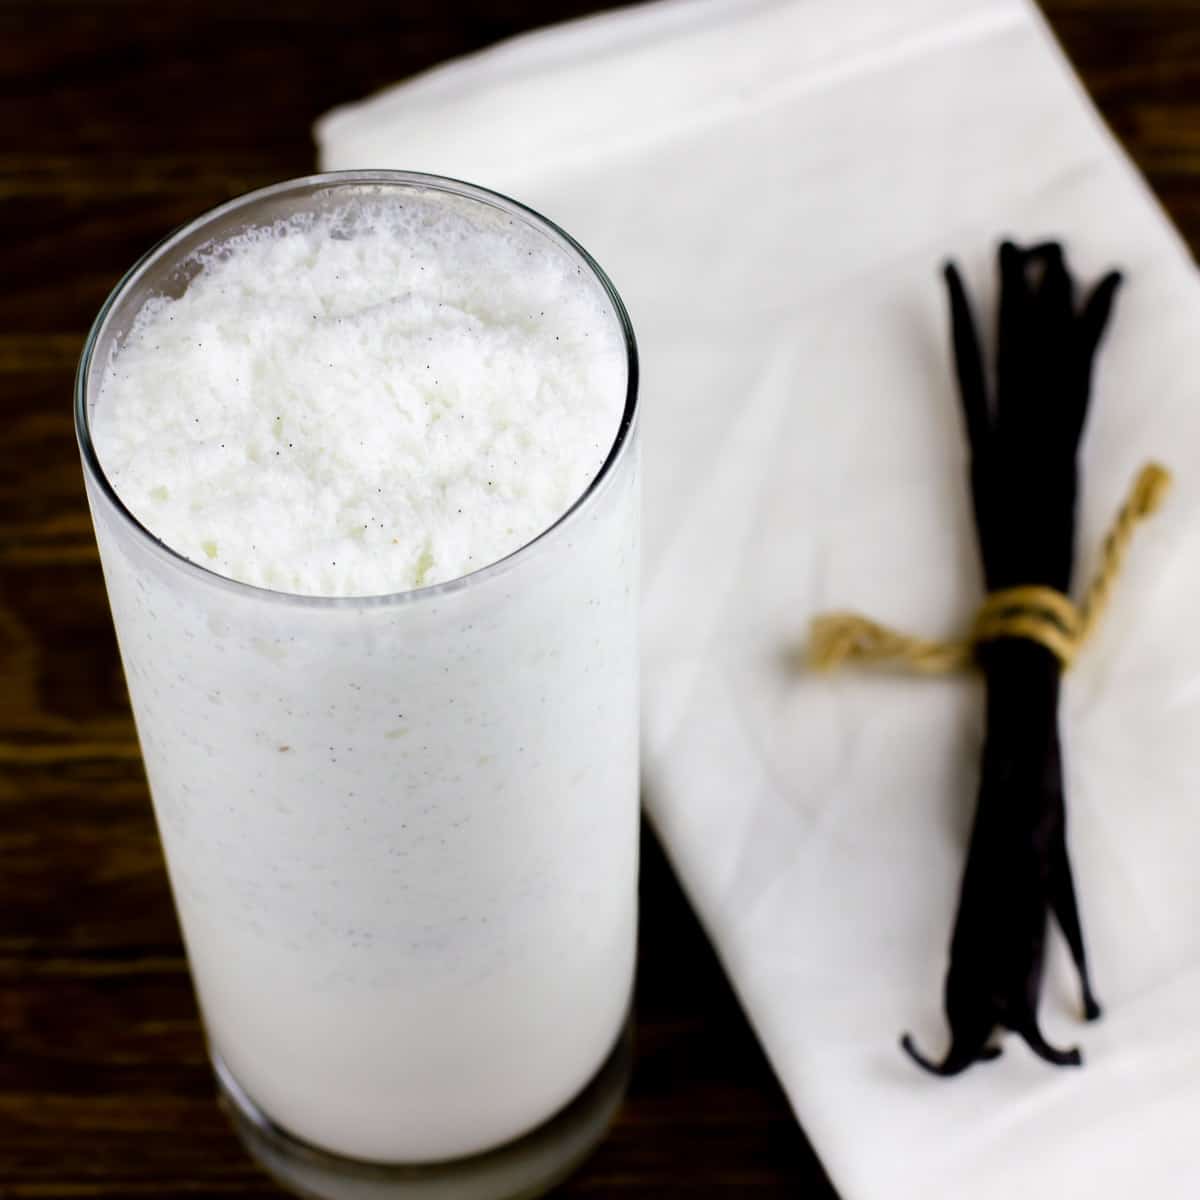 Easy vanilla bean frappe recipe that is just like Starbucks. Iced caffeine free frozen drink with real vanilla beans and cream.